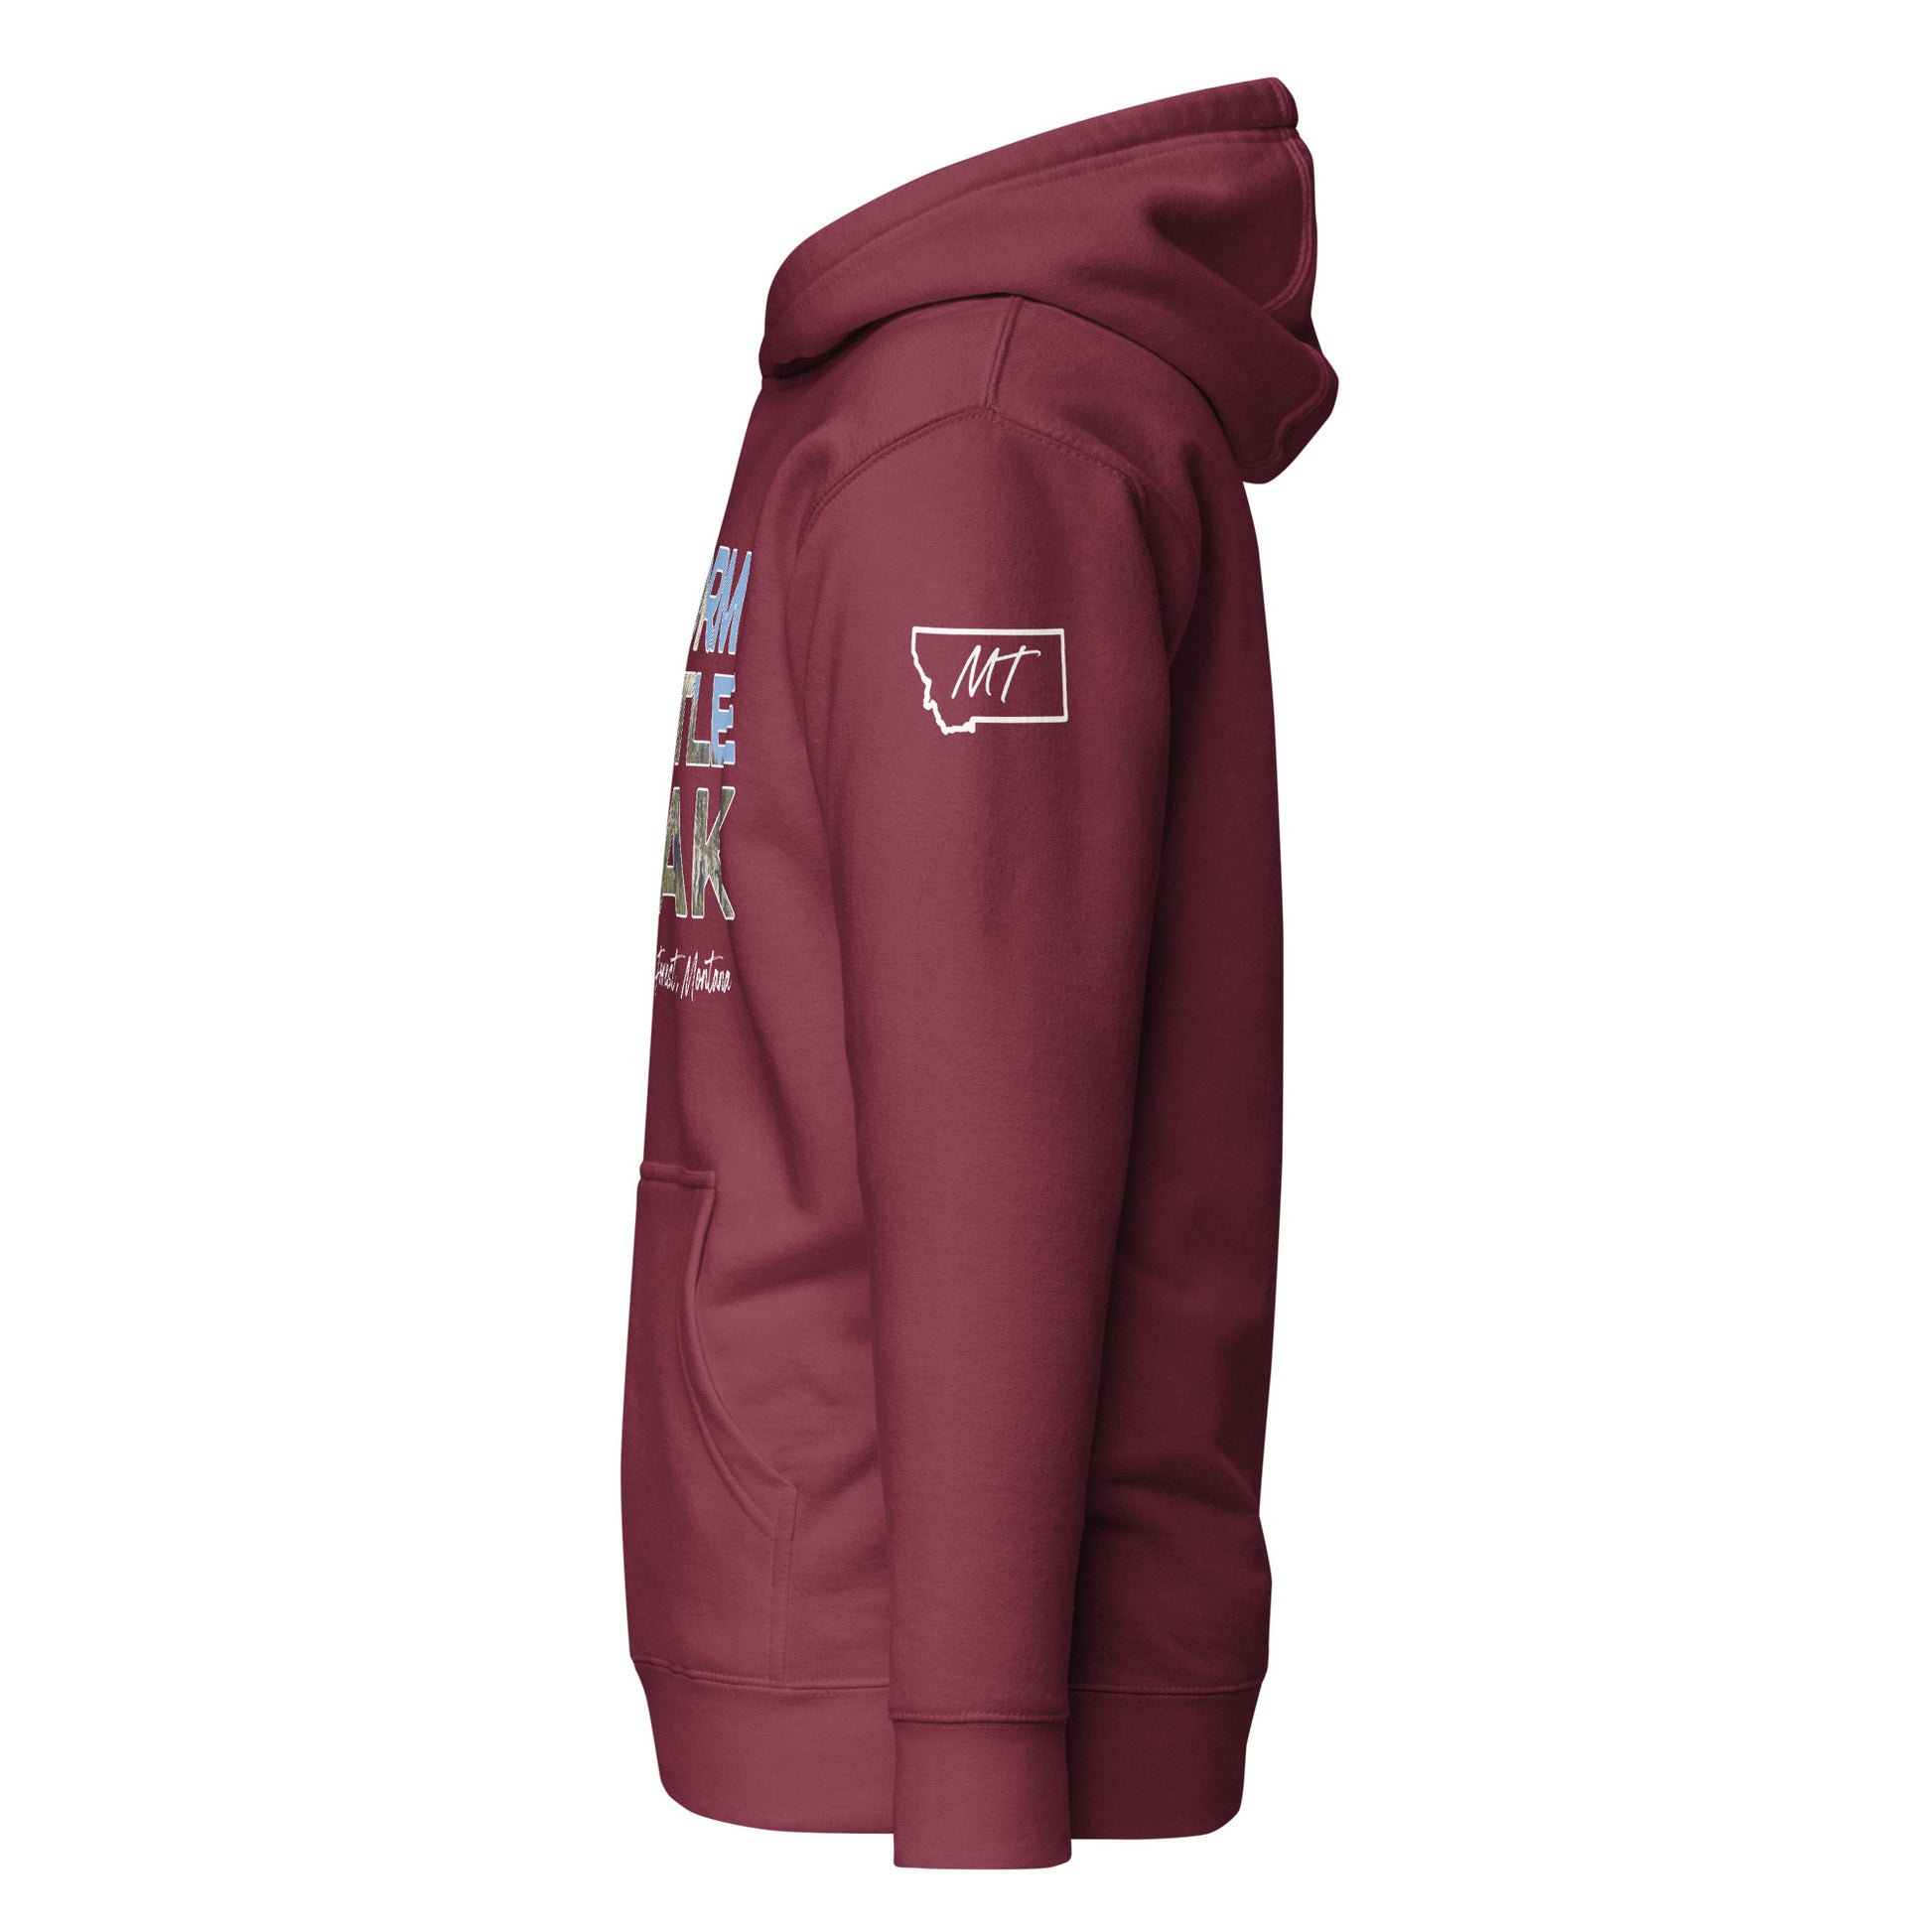 Left Side view of Storm Castle Peak in Custer Gallatin National Forest Montana Maroon Soft Hoodie from Park Attire